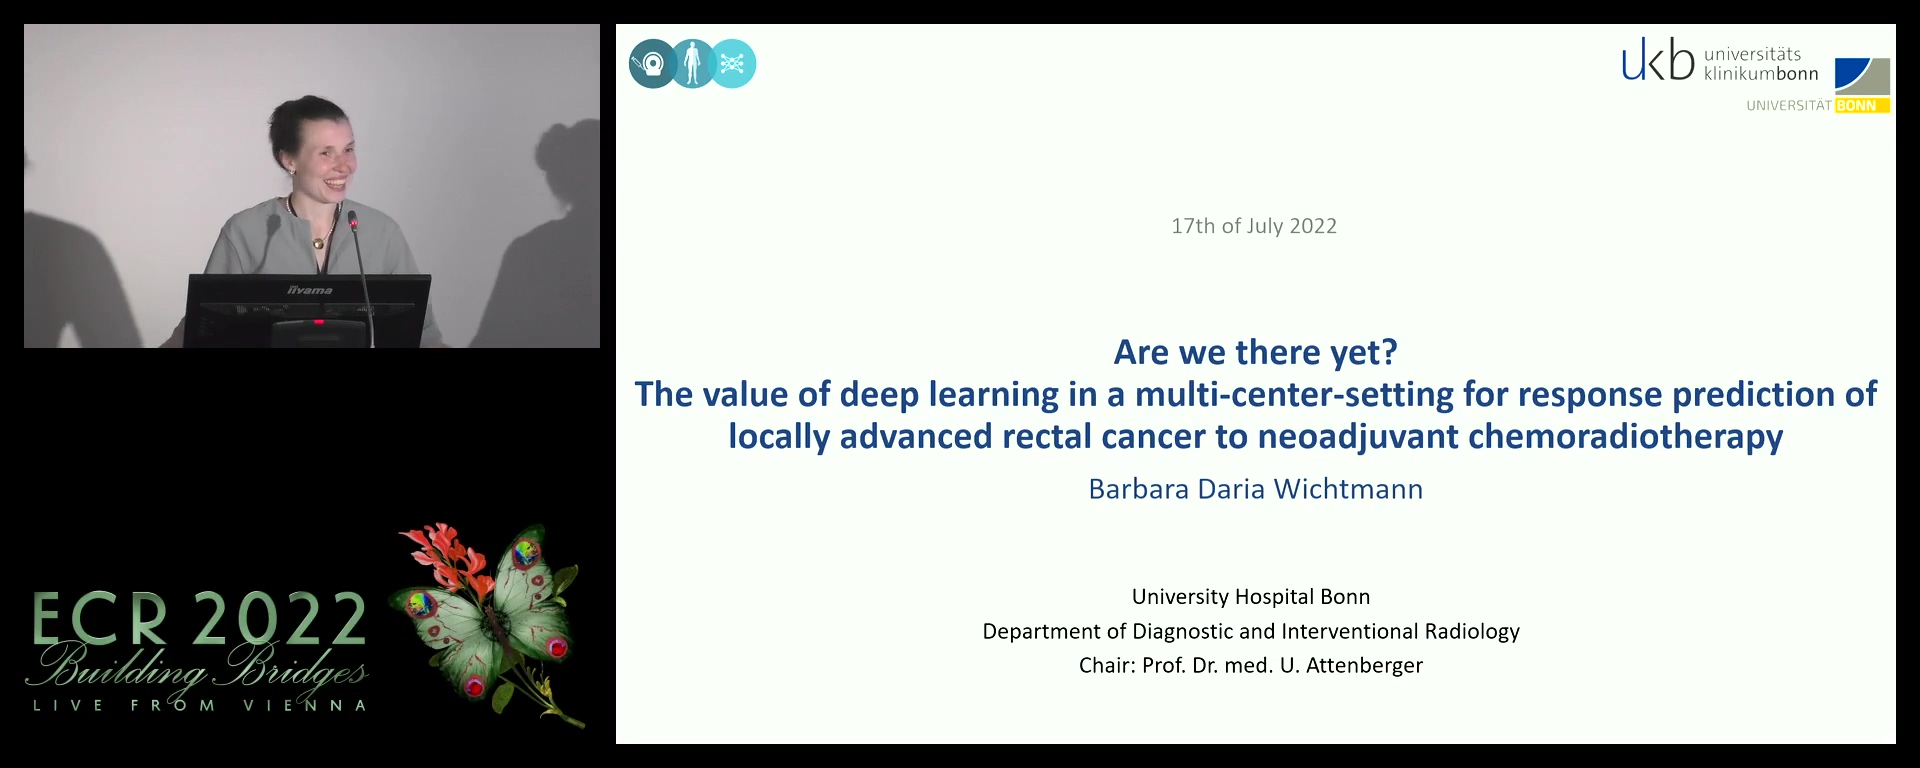 Are we there yet? The value of deep learning in a multicentre-setting for response prediction of locally advanced rectal cancer to neoadjuvant chemoradiotherapy - Barbara Wichtmann, Bonn / DE